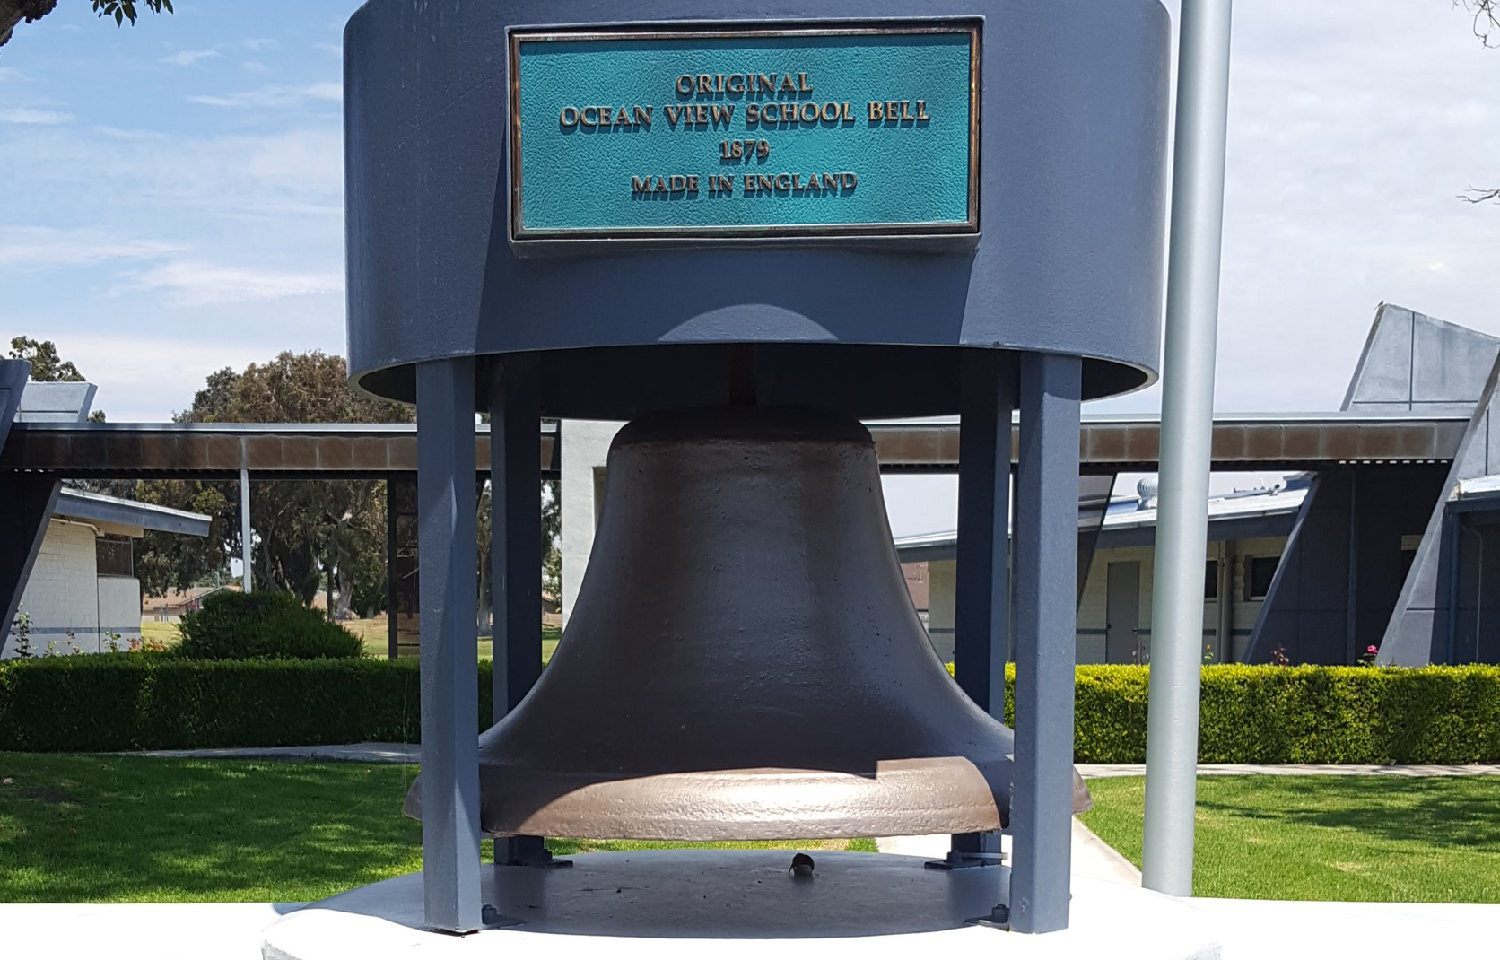 The OVSD Bell